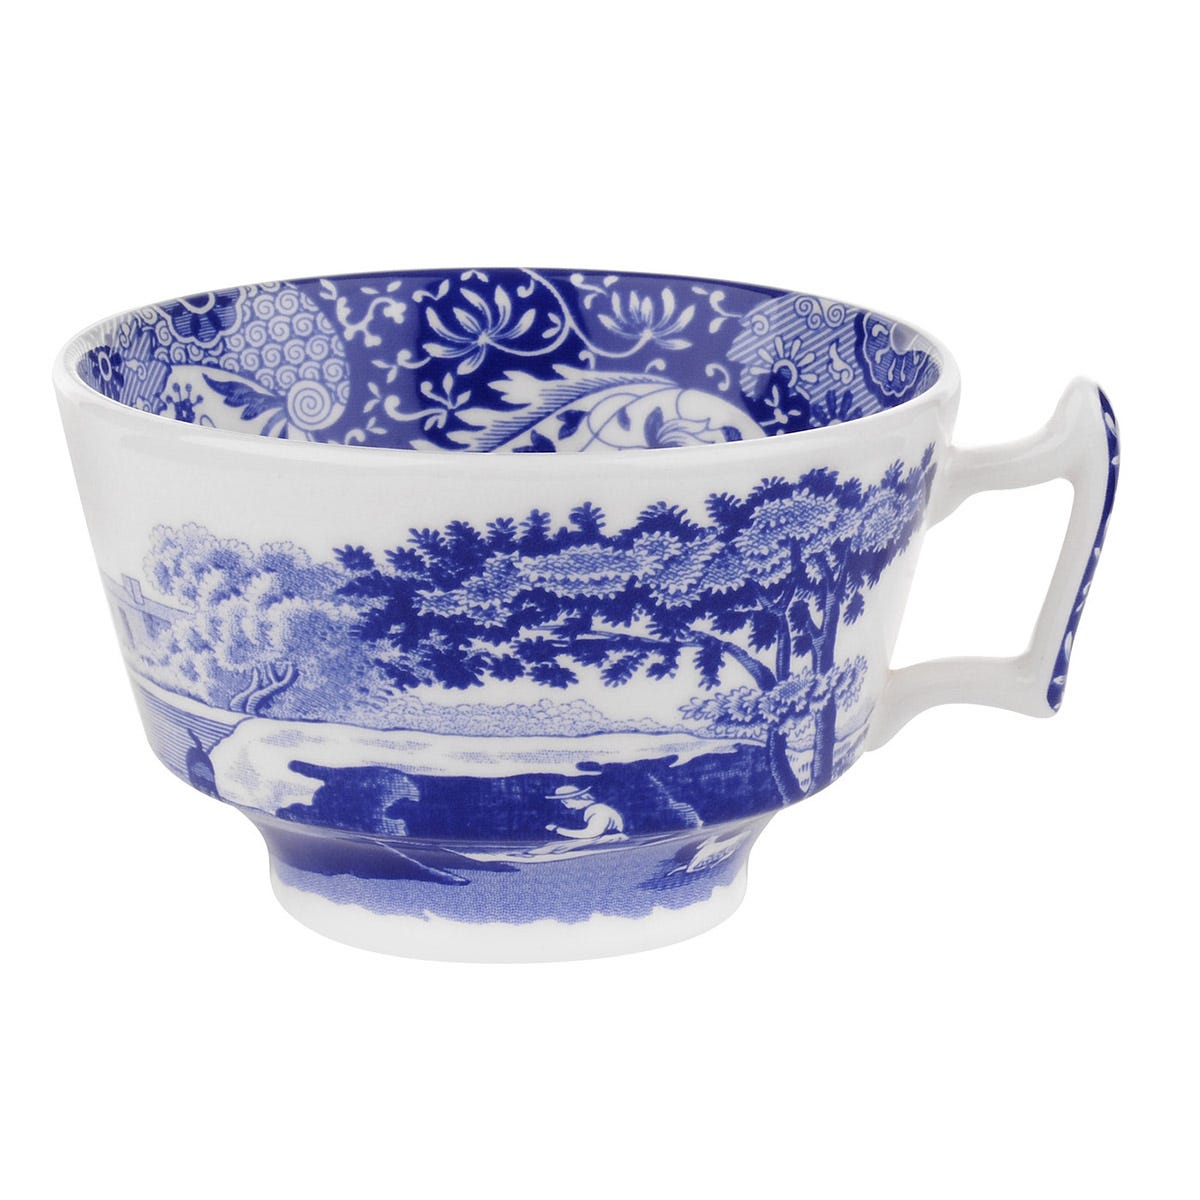 SPARE PART teacup ONLY Blue Italian